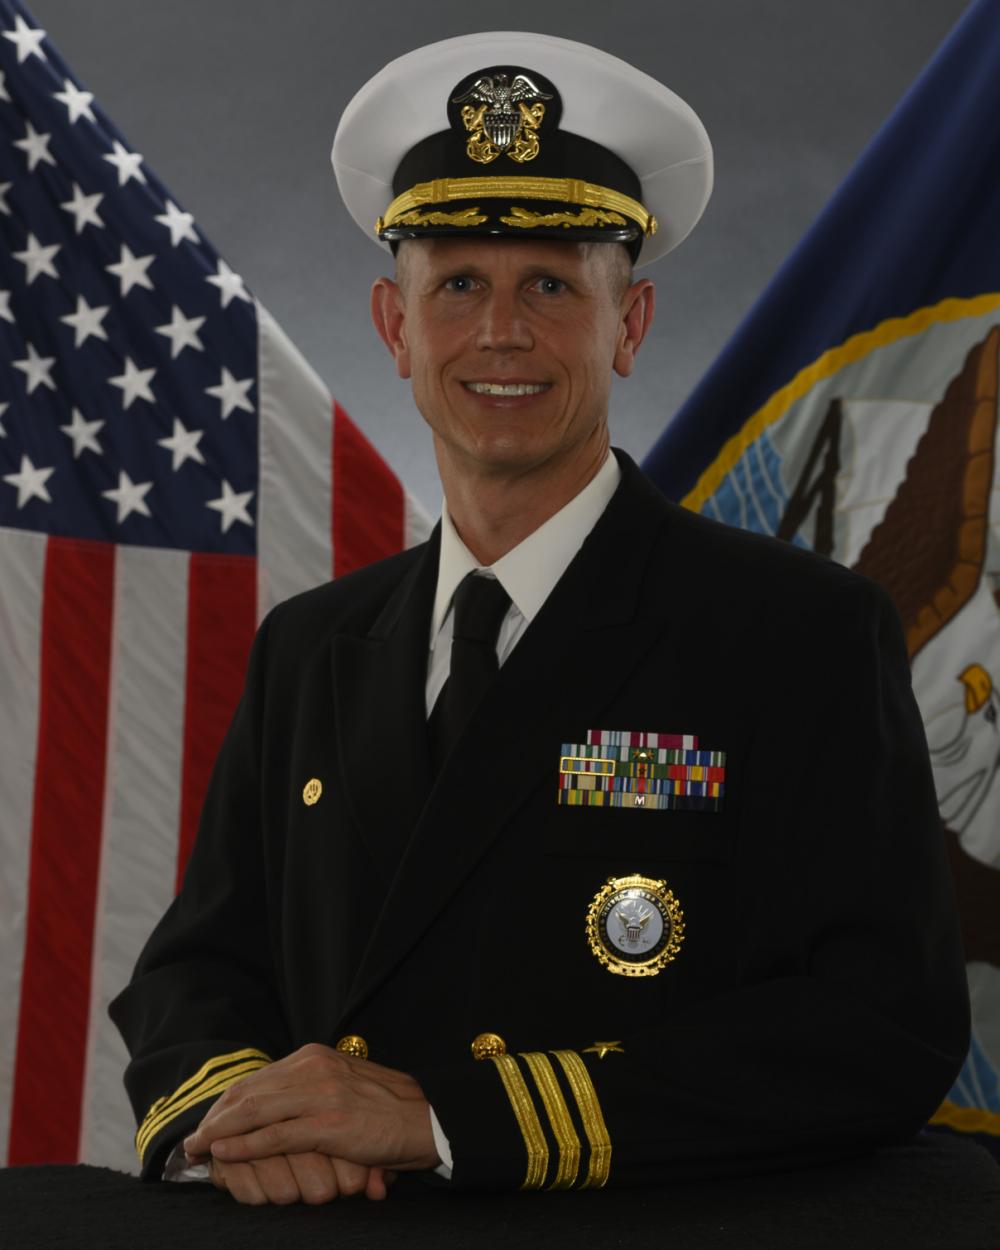 Navy Talent Acquisition Group Nashville's Executive Officer